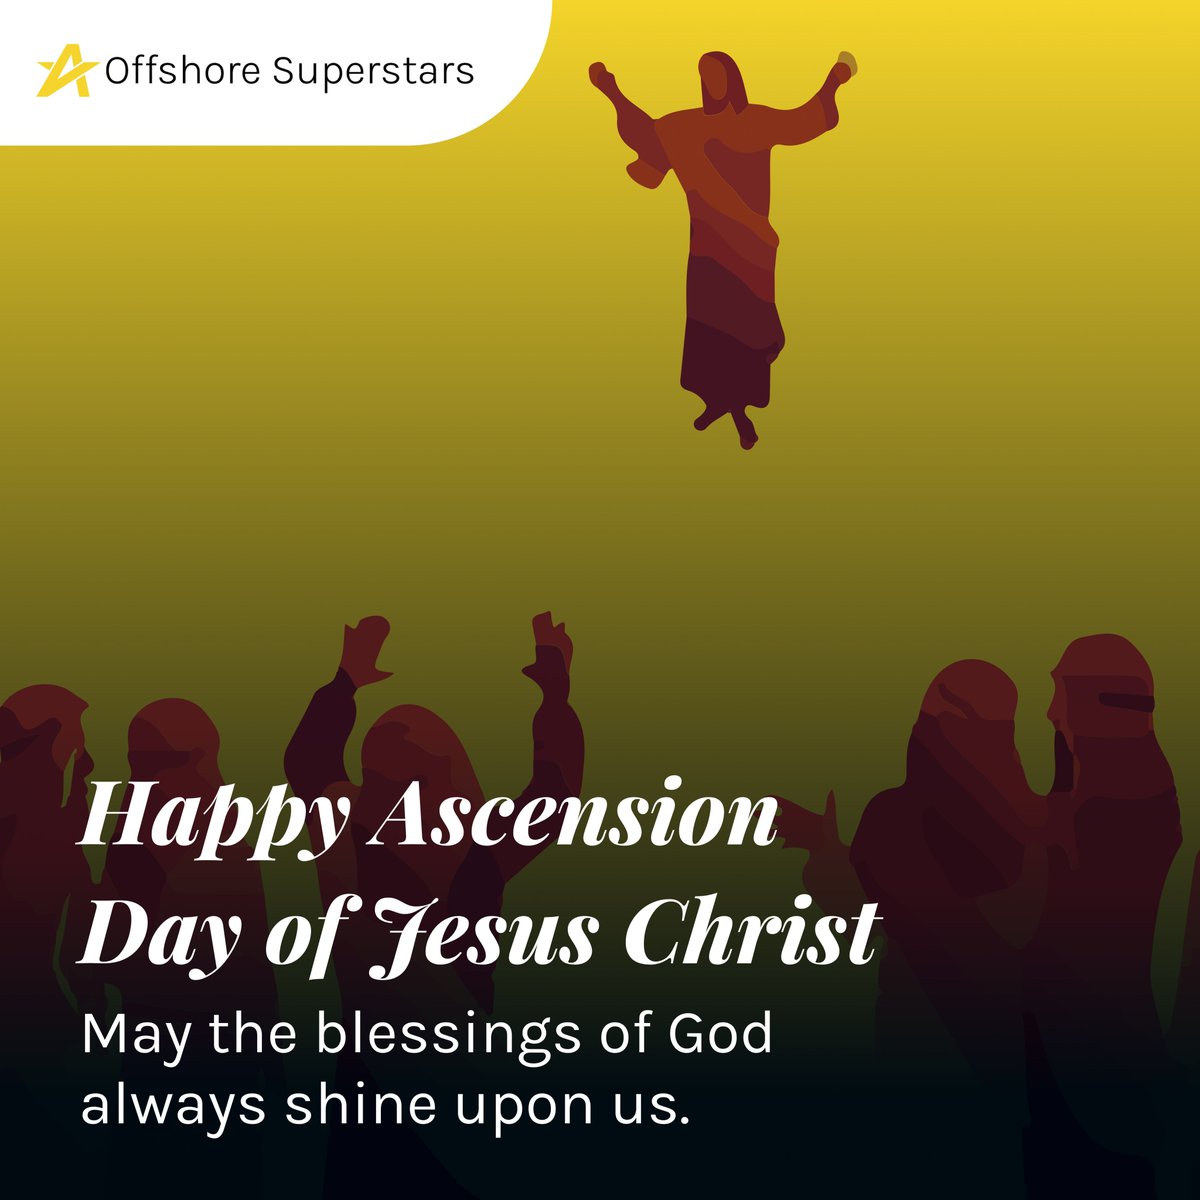 Happy Ascension Day! Embrace the joy, feel the blessings, and bask in the light of unity and hope 🌟

#AscensionDay #OffshoreSuperstars #career #globalcareer #remotework #internship #workopportunities